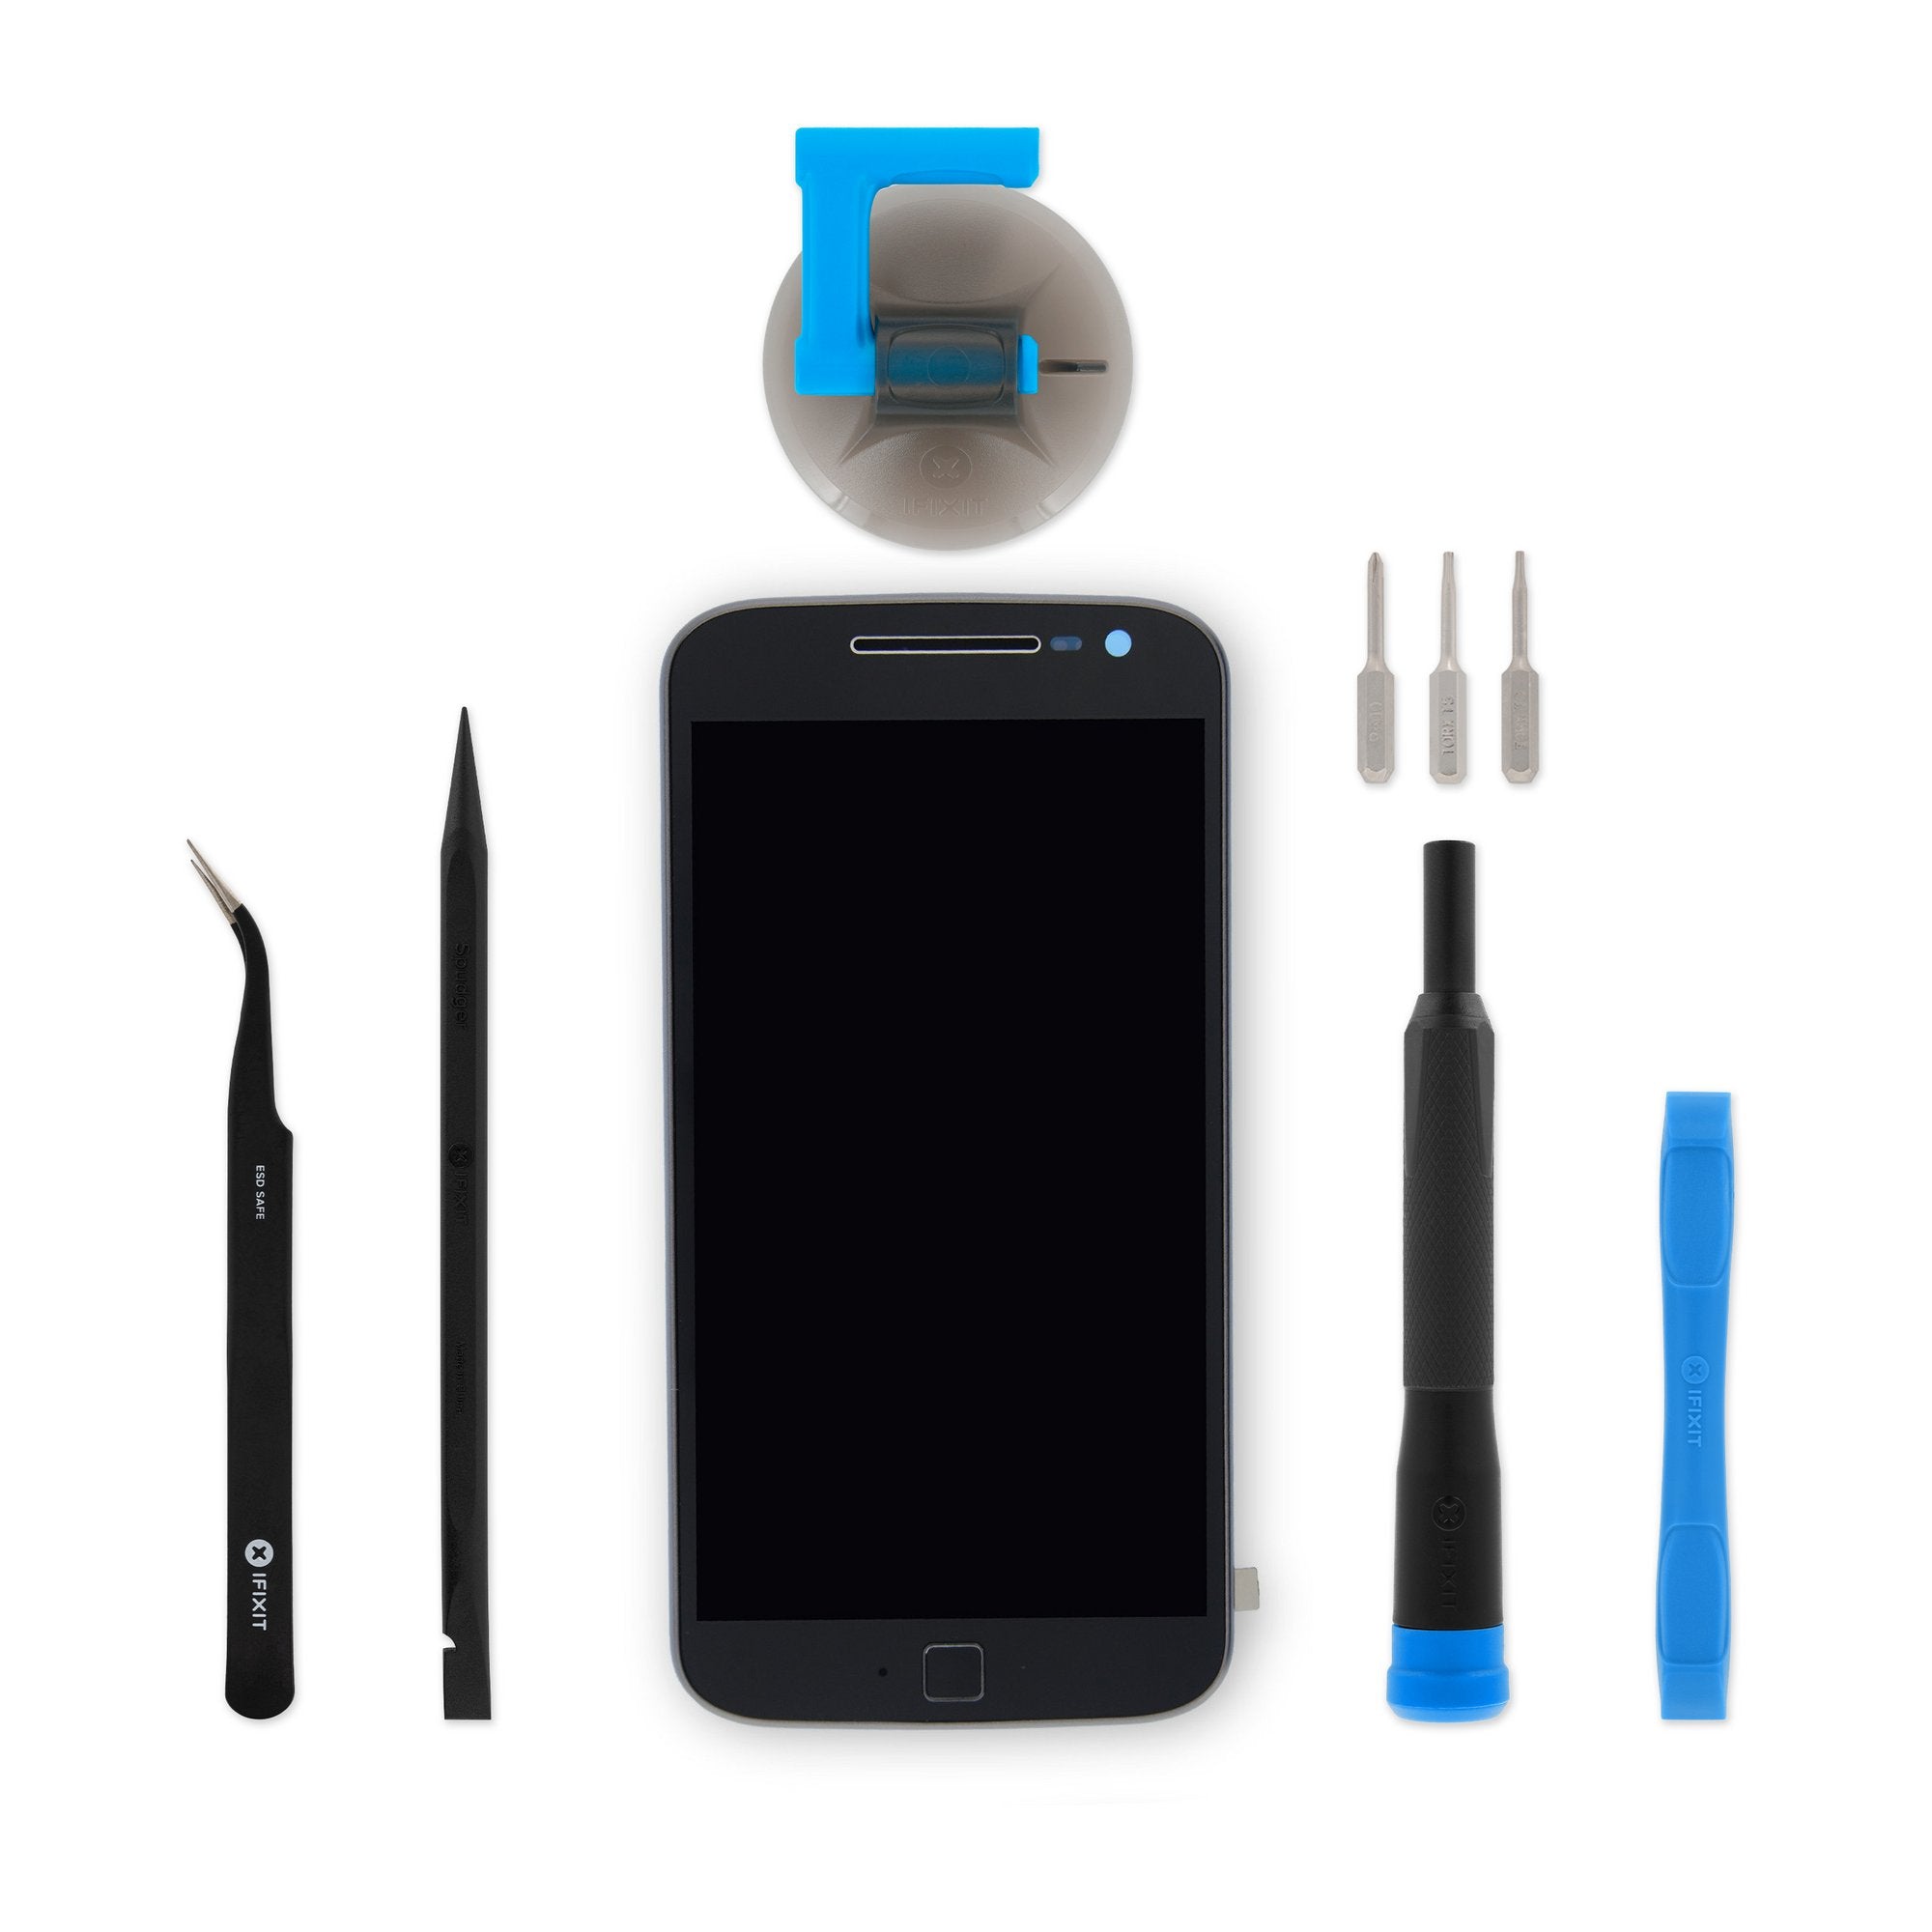 How to Moto G4 Plus Troubleshooting - iFixit Repair Guide